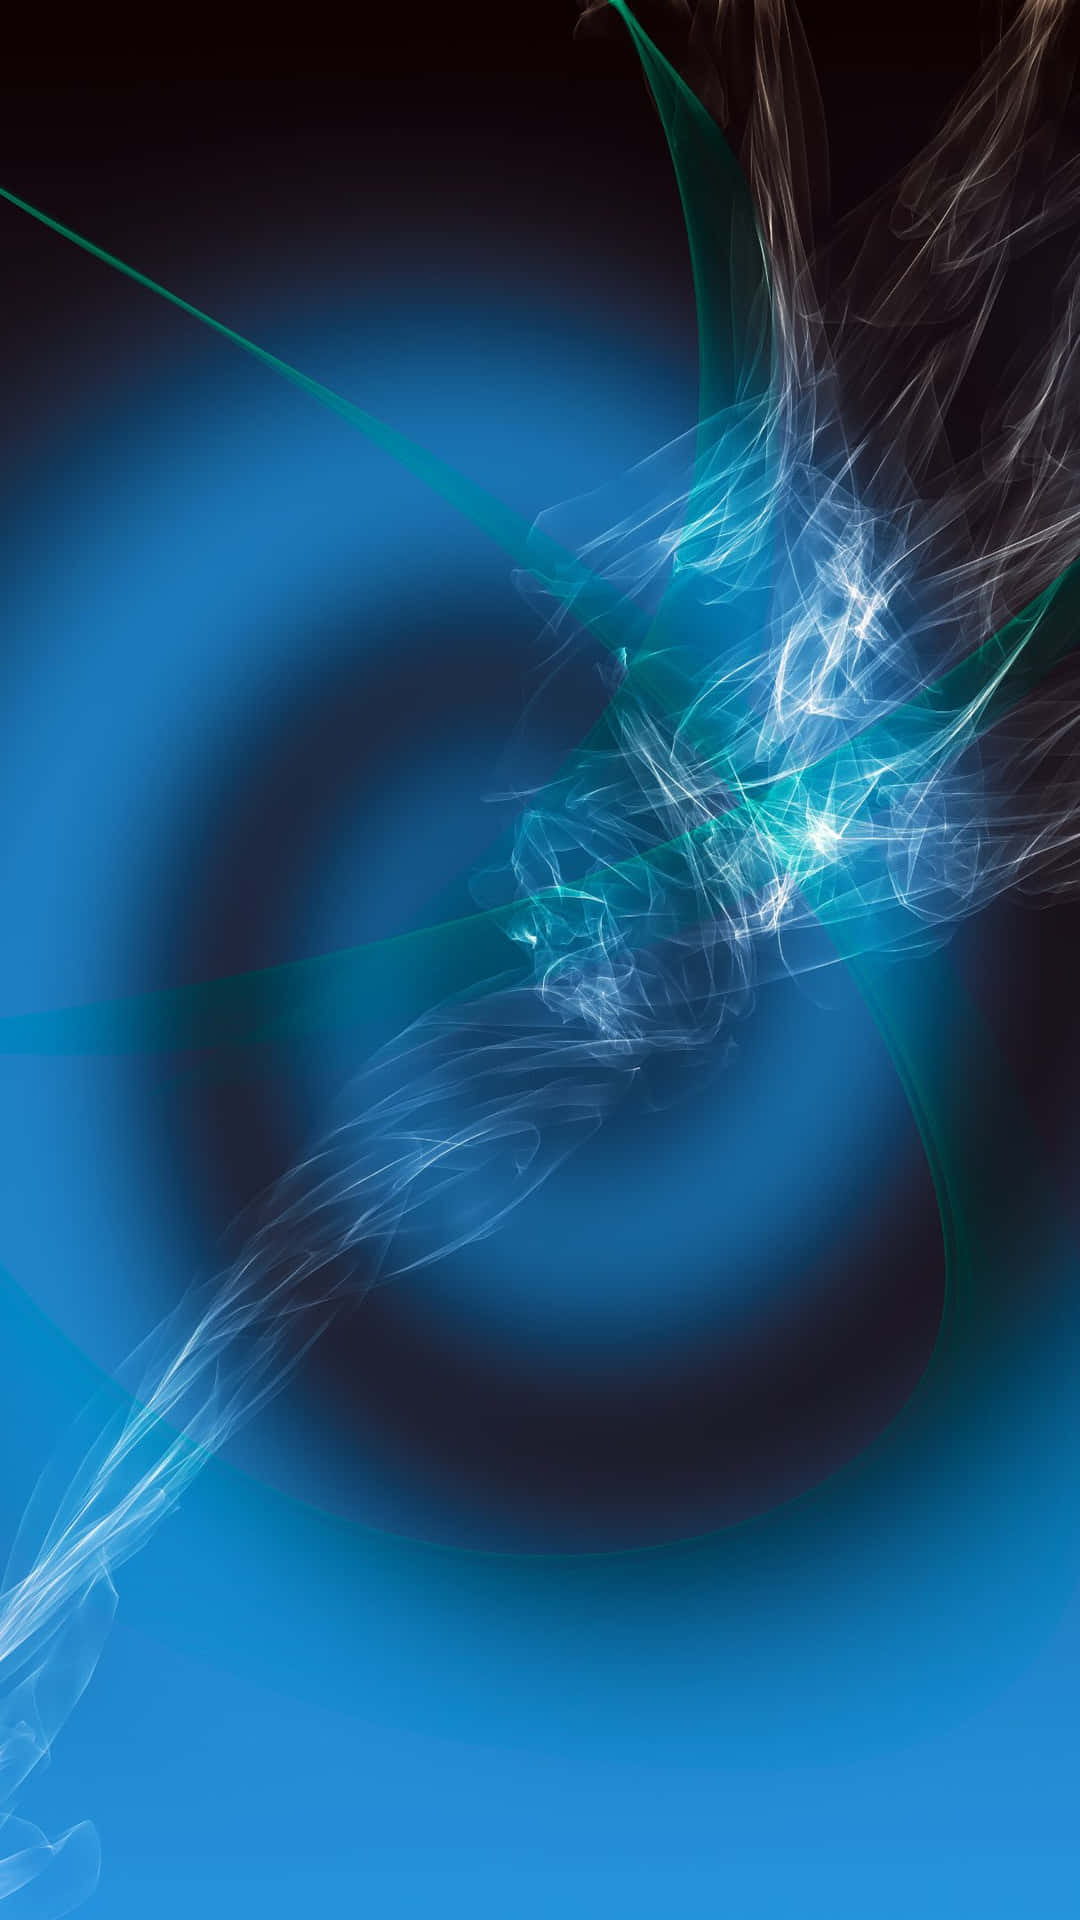 A blue swirl background featuring a mesmerizing optical effect.